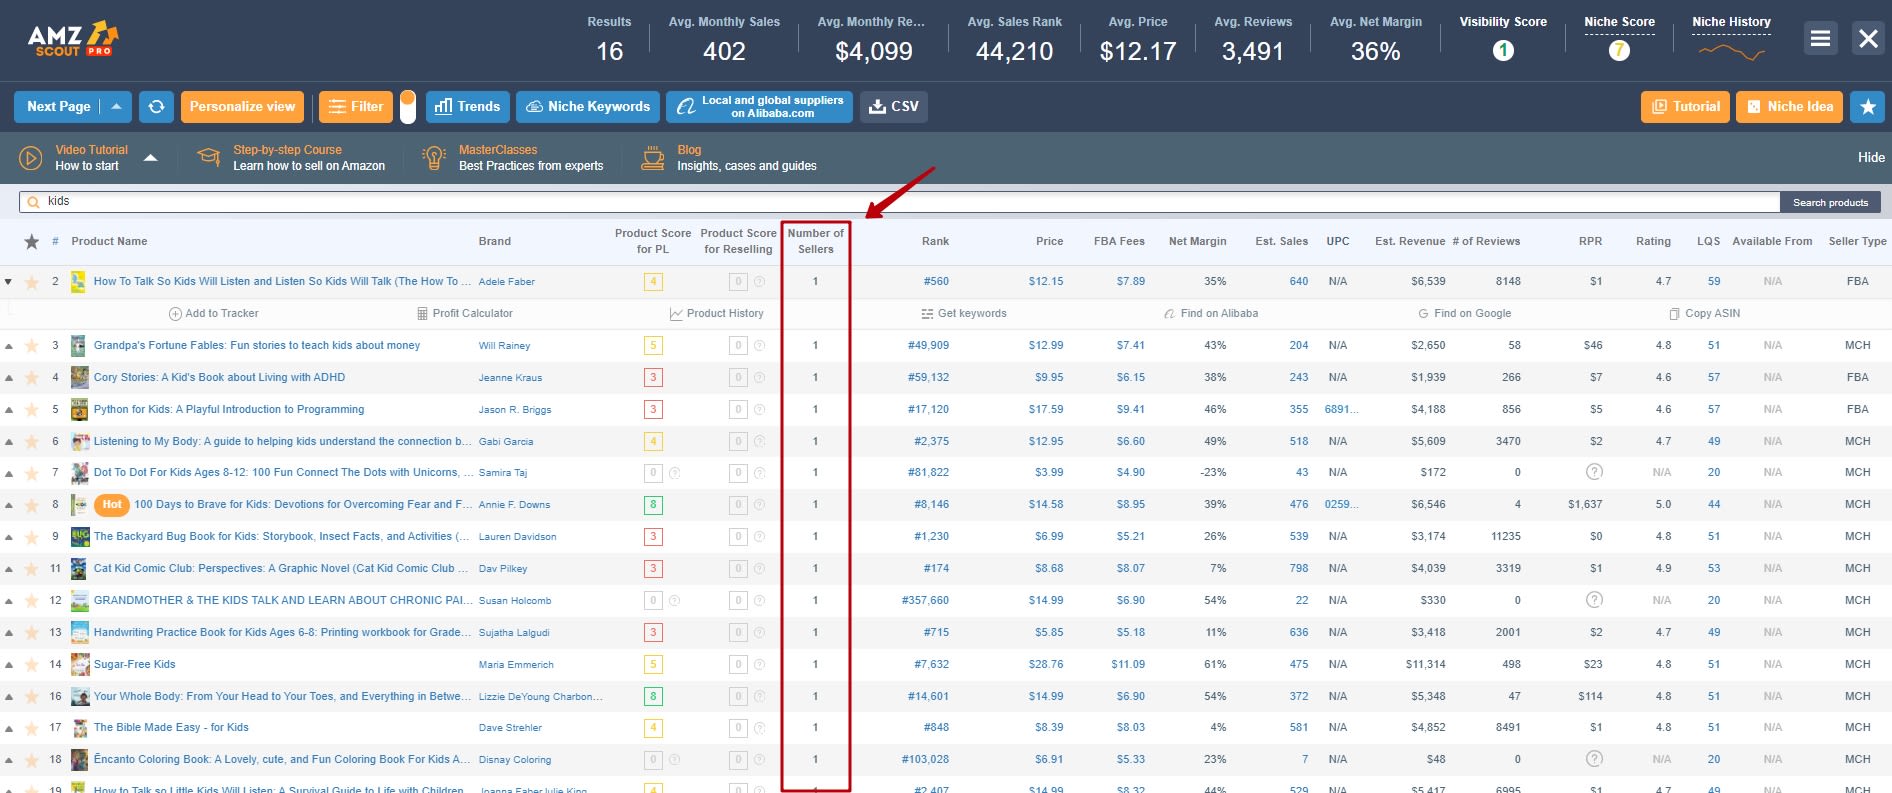 How to use AMZScout to check the number of sellers